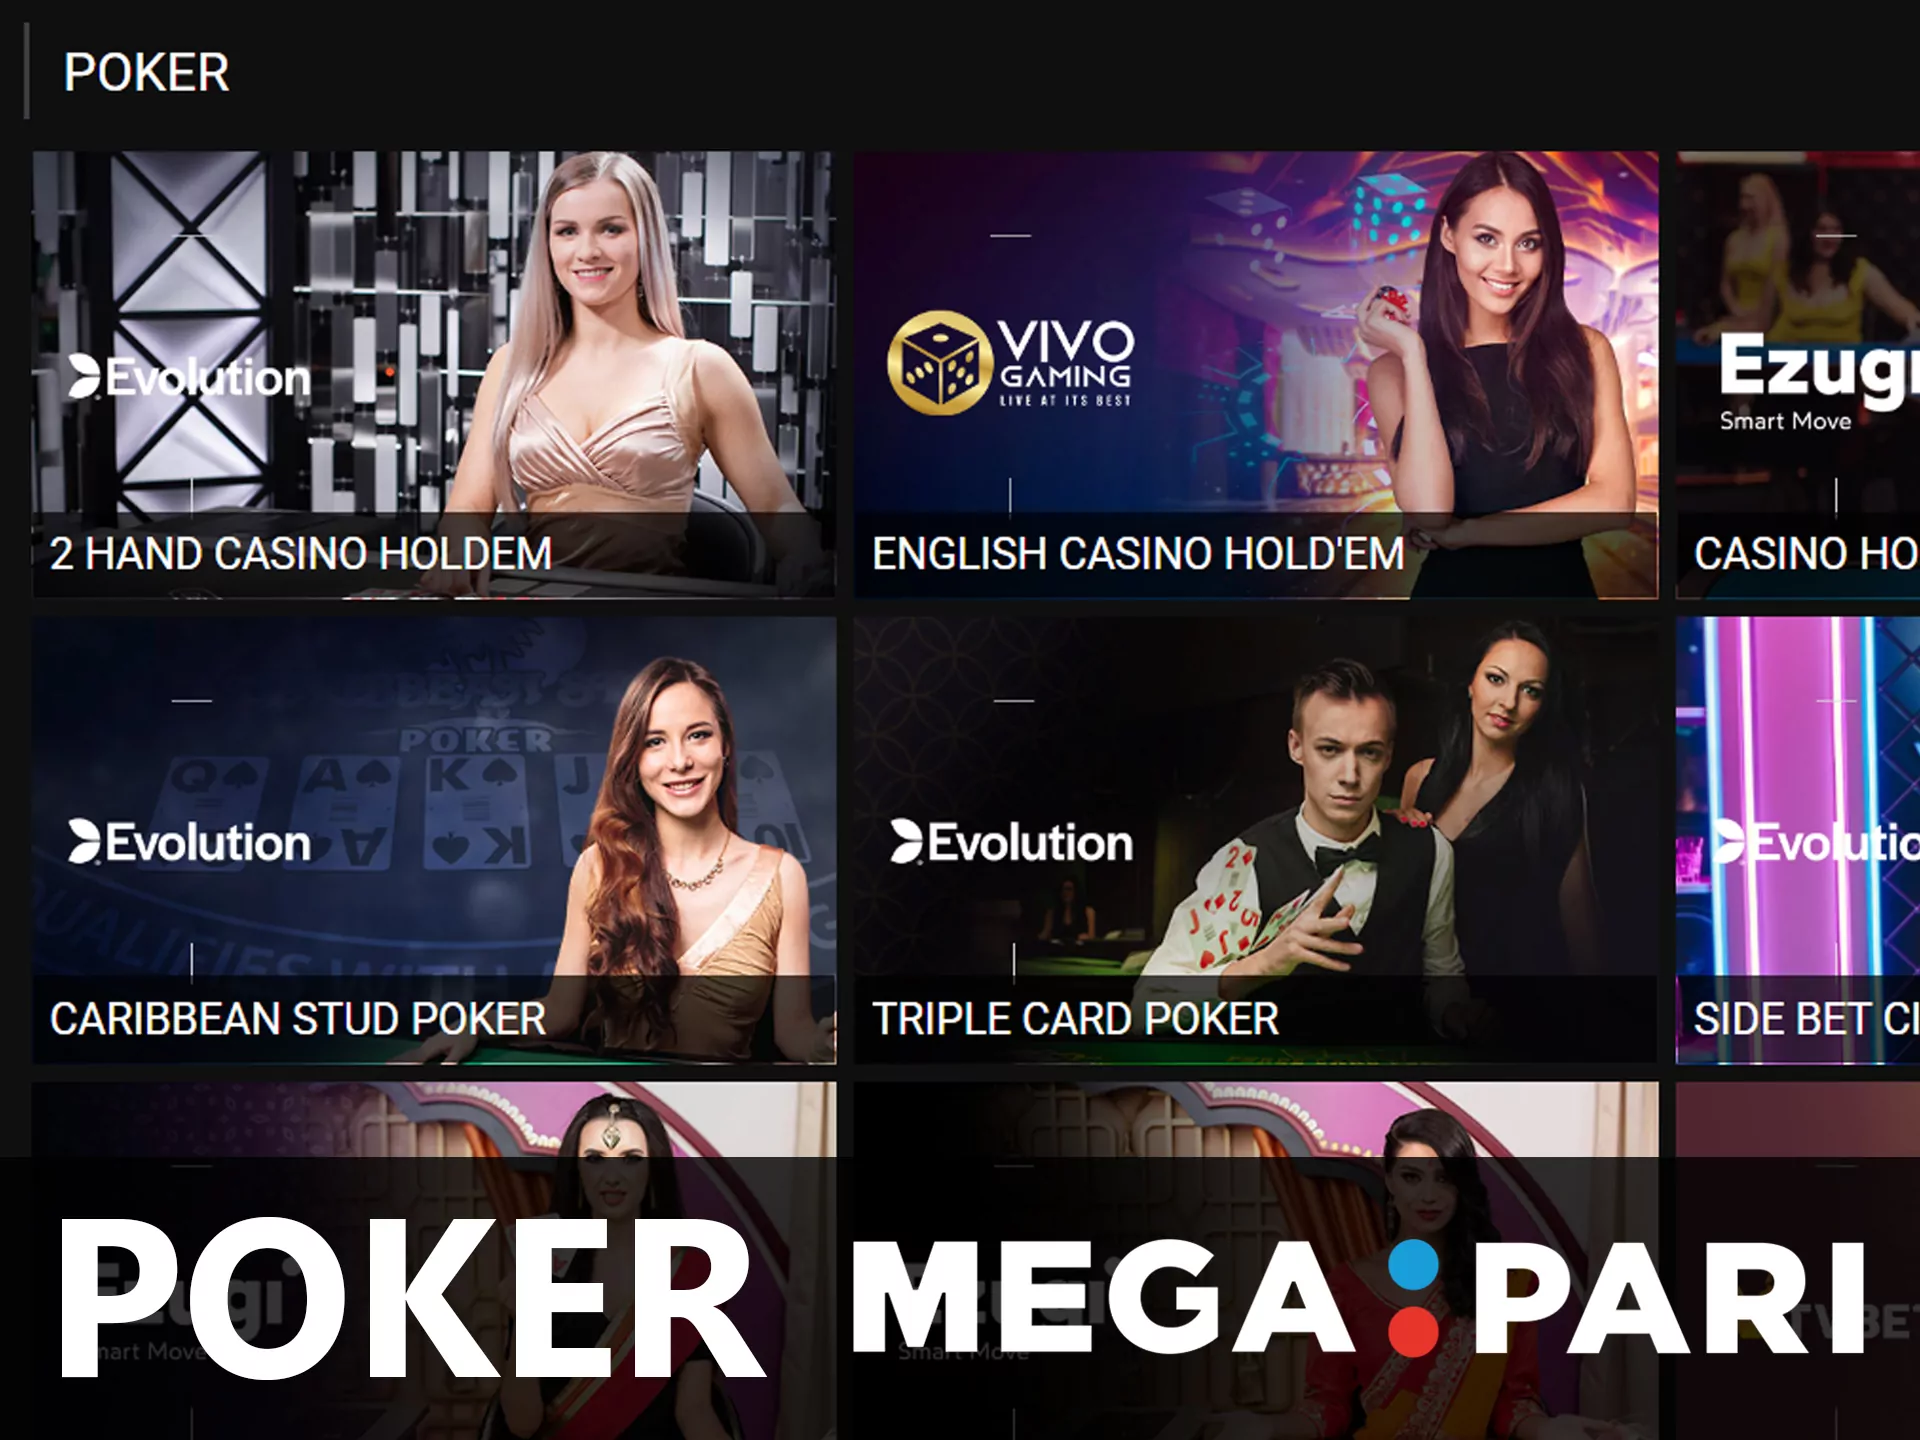 There are many different poker games in the Mega Pari casino.